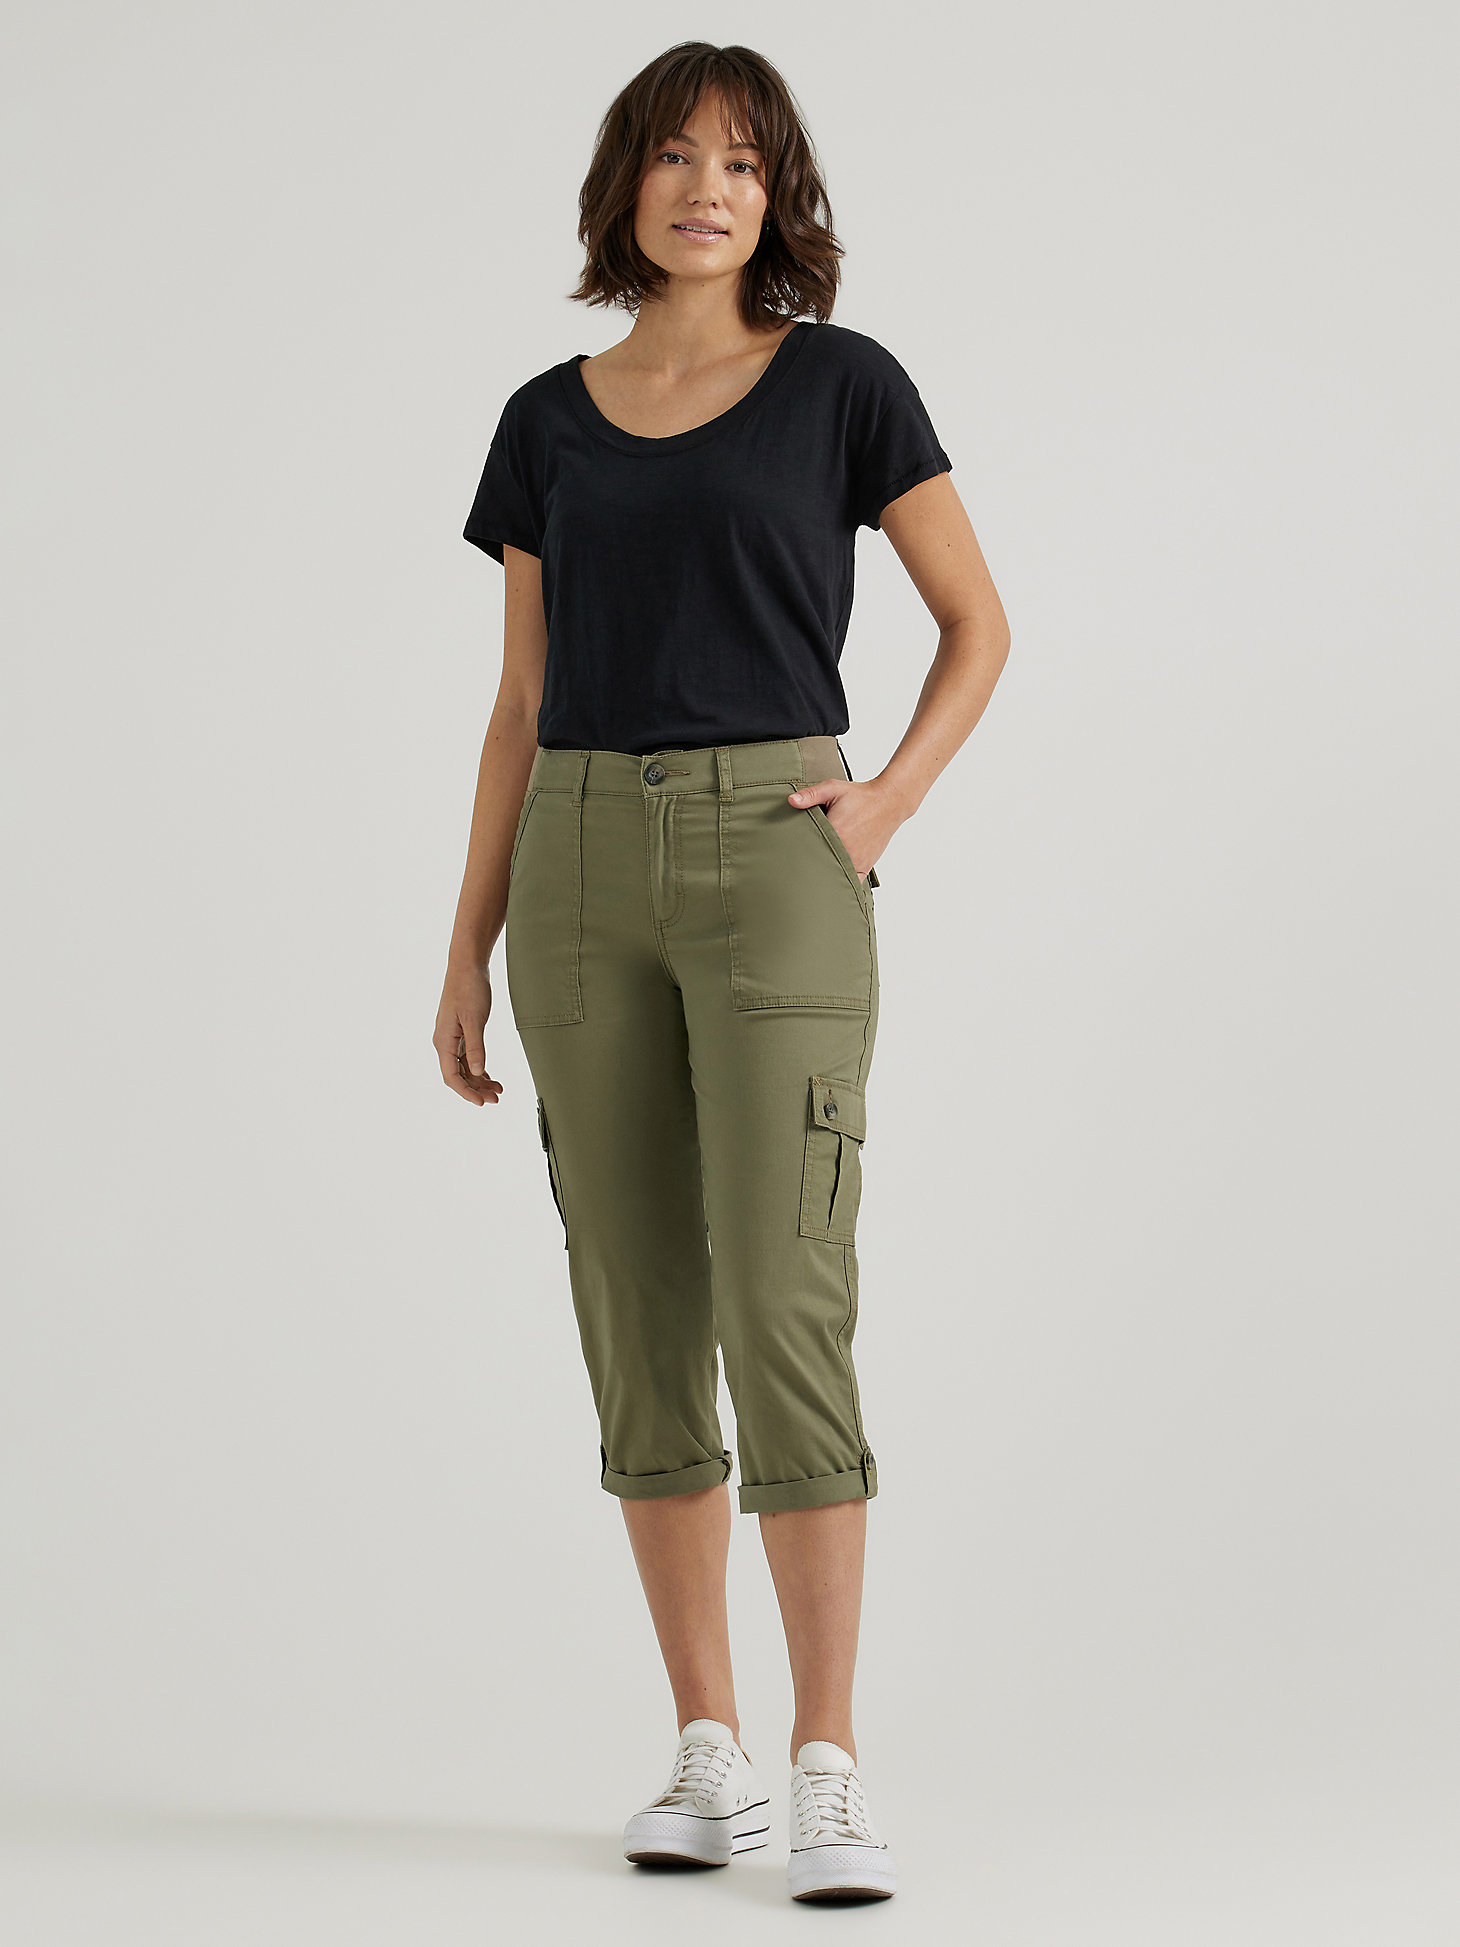 Women's Ultra Lux Comfort with Flex-to-Go Relaxed Fit Cargo Capri in Deep Lichen Green alternative view 2